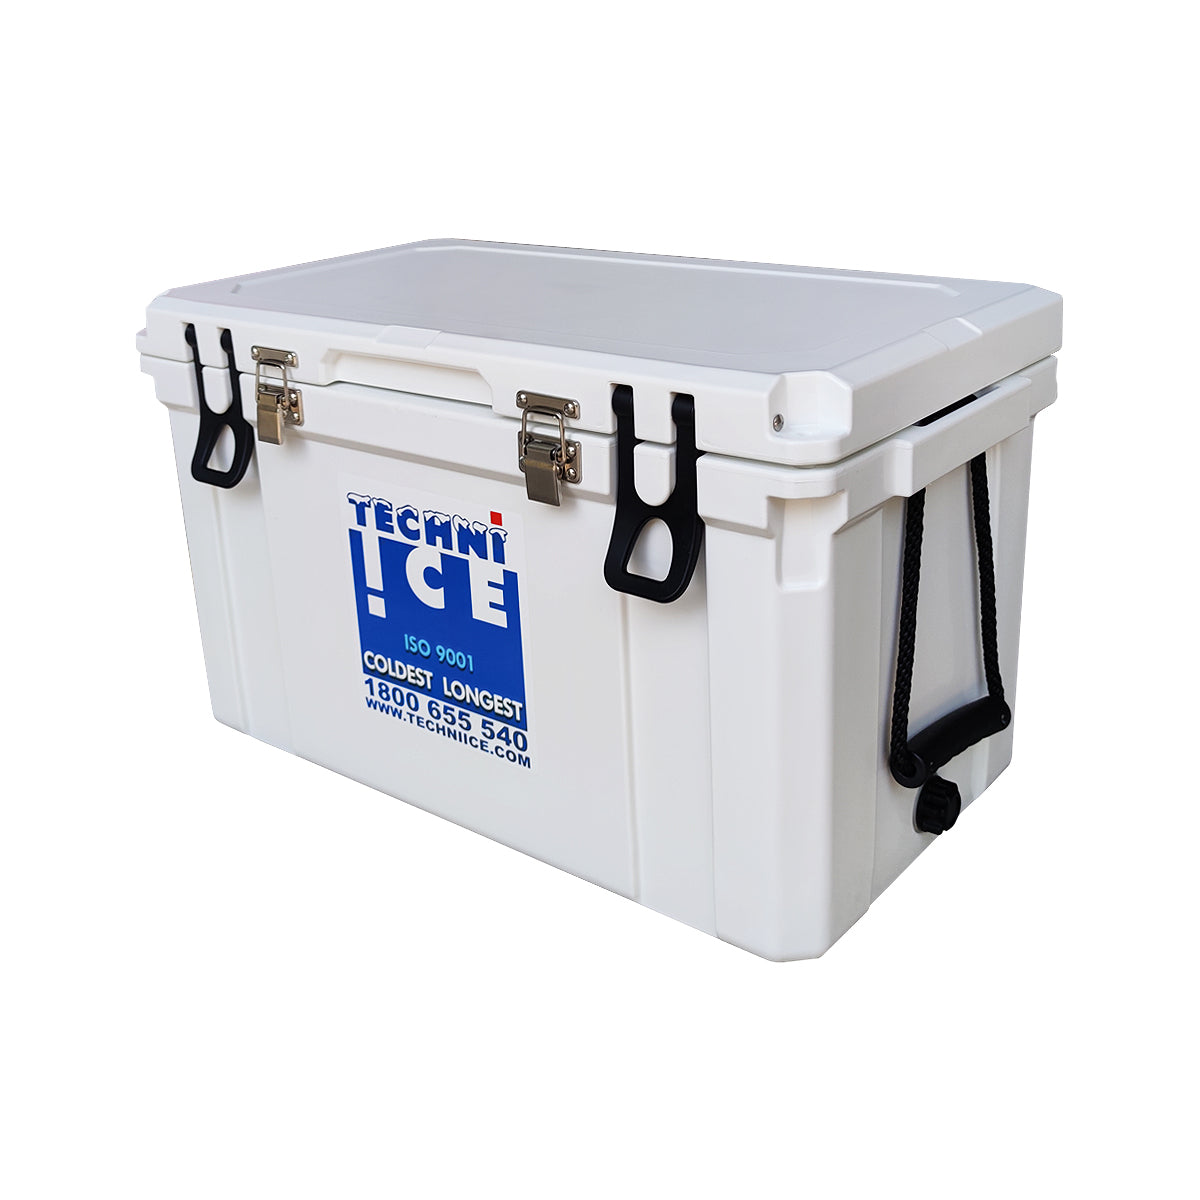 45L Classic Hardcore *FRESH STOCKS OF MARBLE WHITE JUST ARRIVED *Blue and White PREORDER FOR JULY DISPATCH *FREE 6 REUSABLE DRY ICE PACKS VALUES $32.95